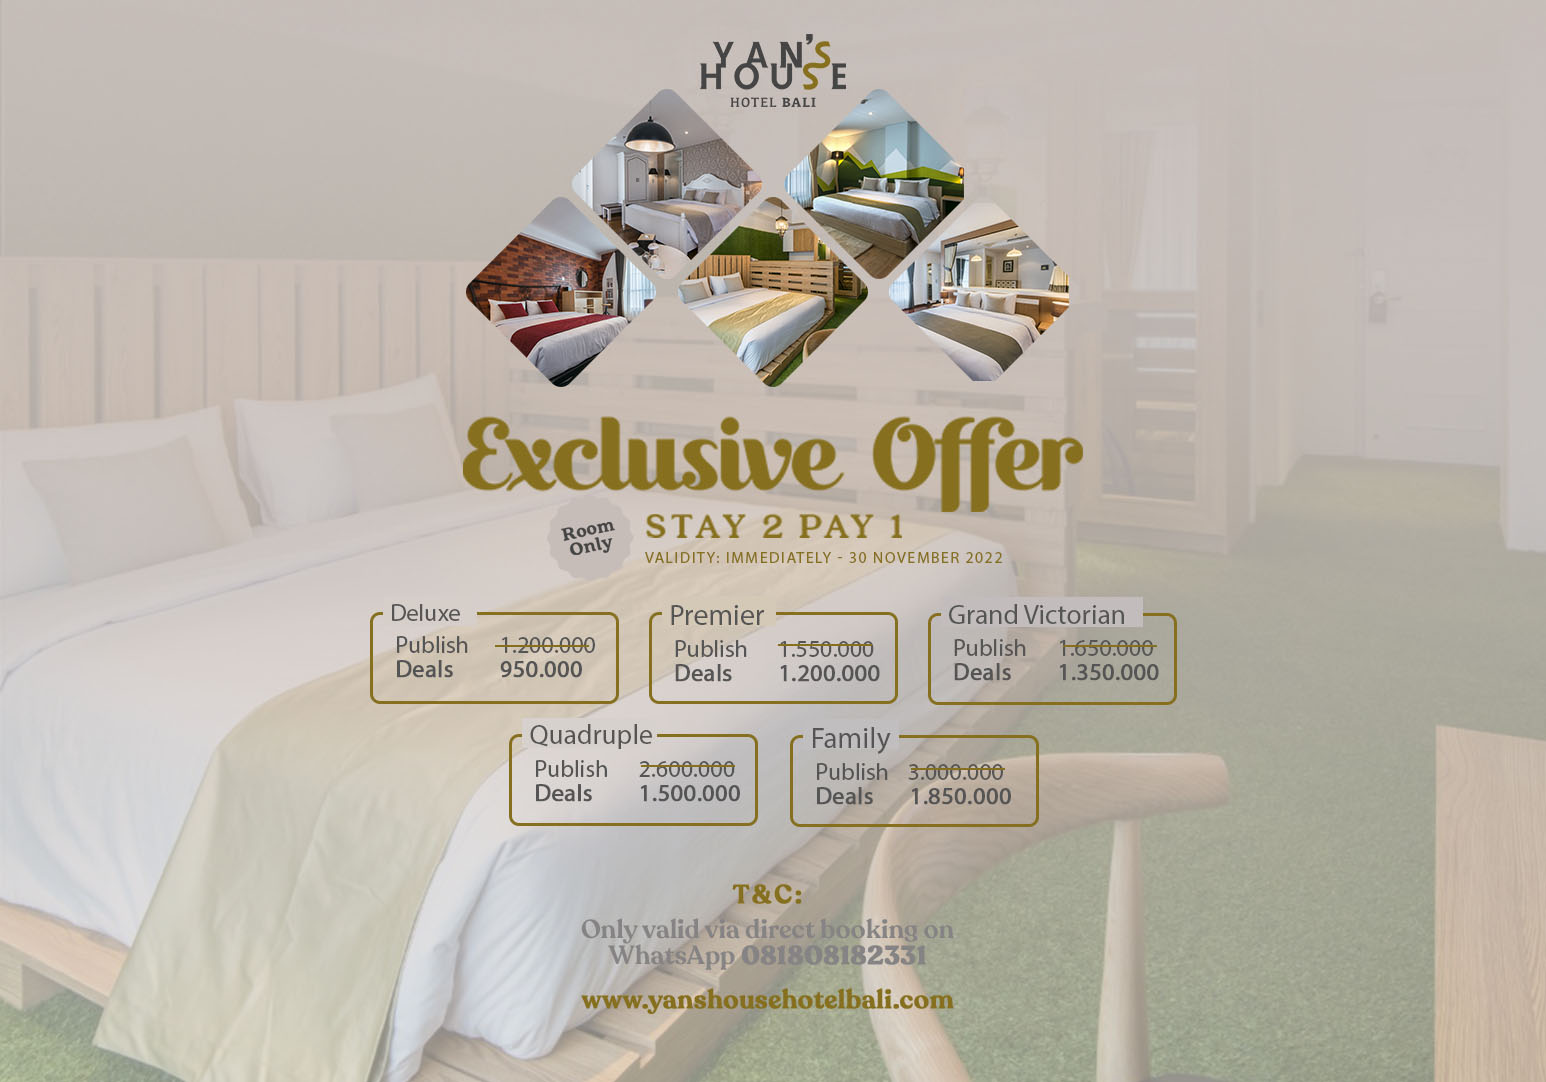 Exclusive Offer - Stay 2 Pay 1